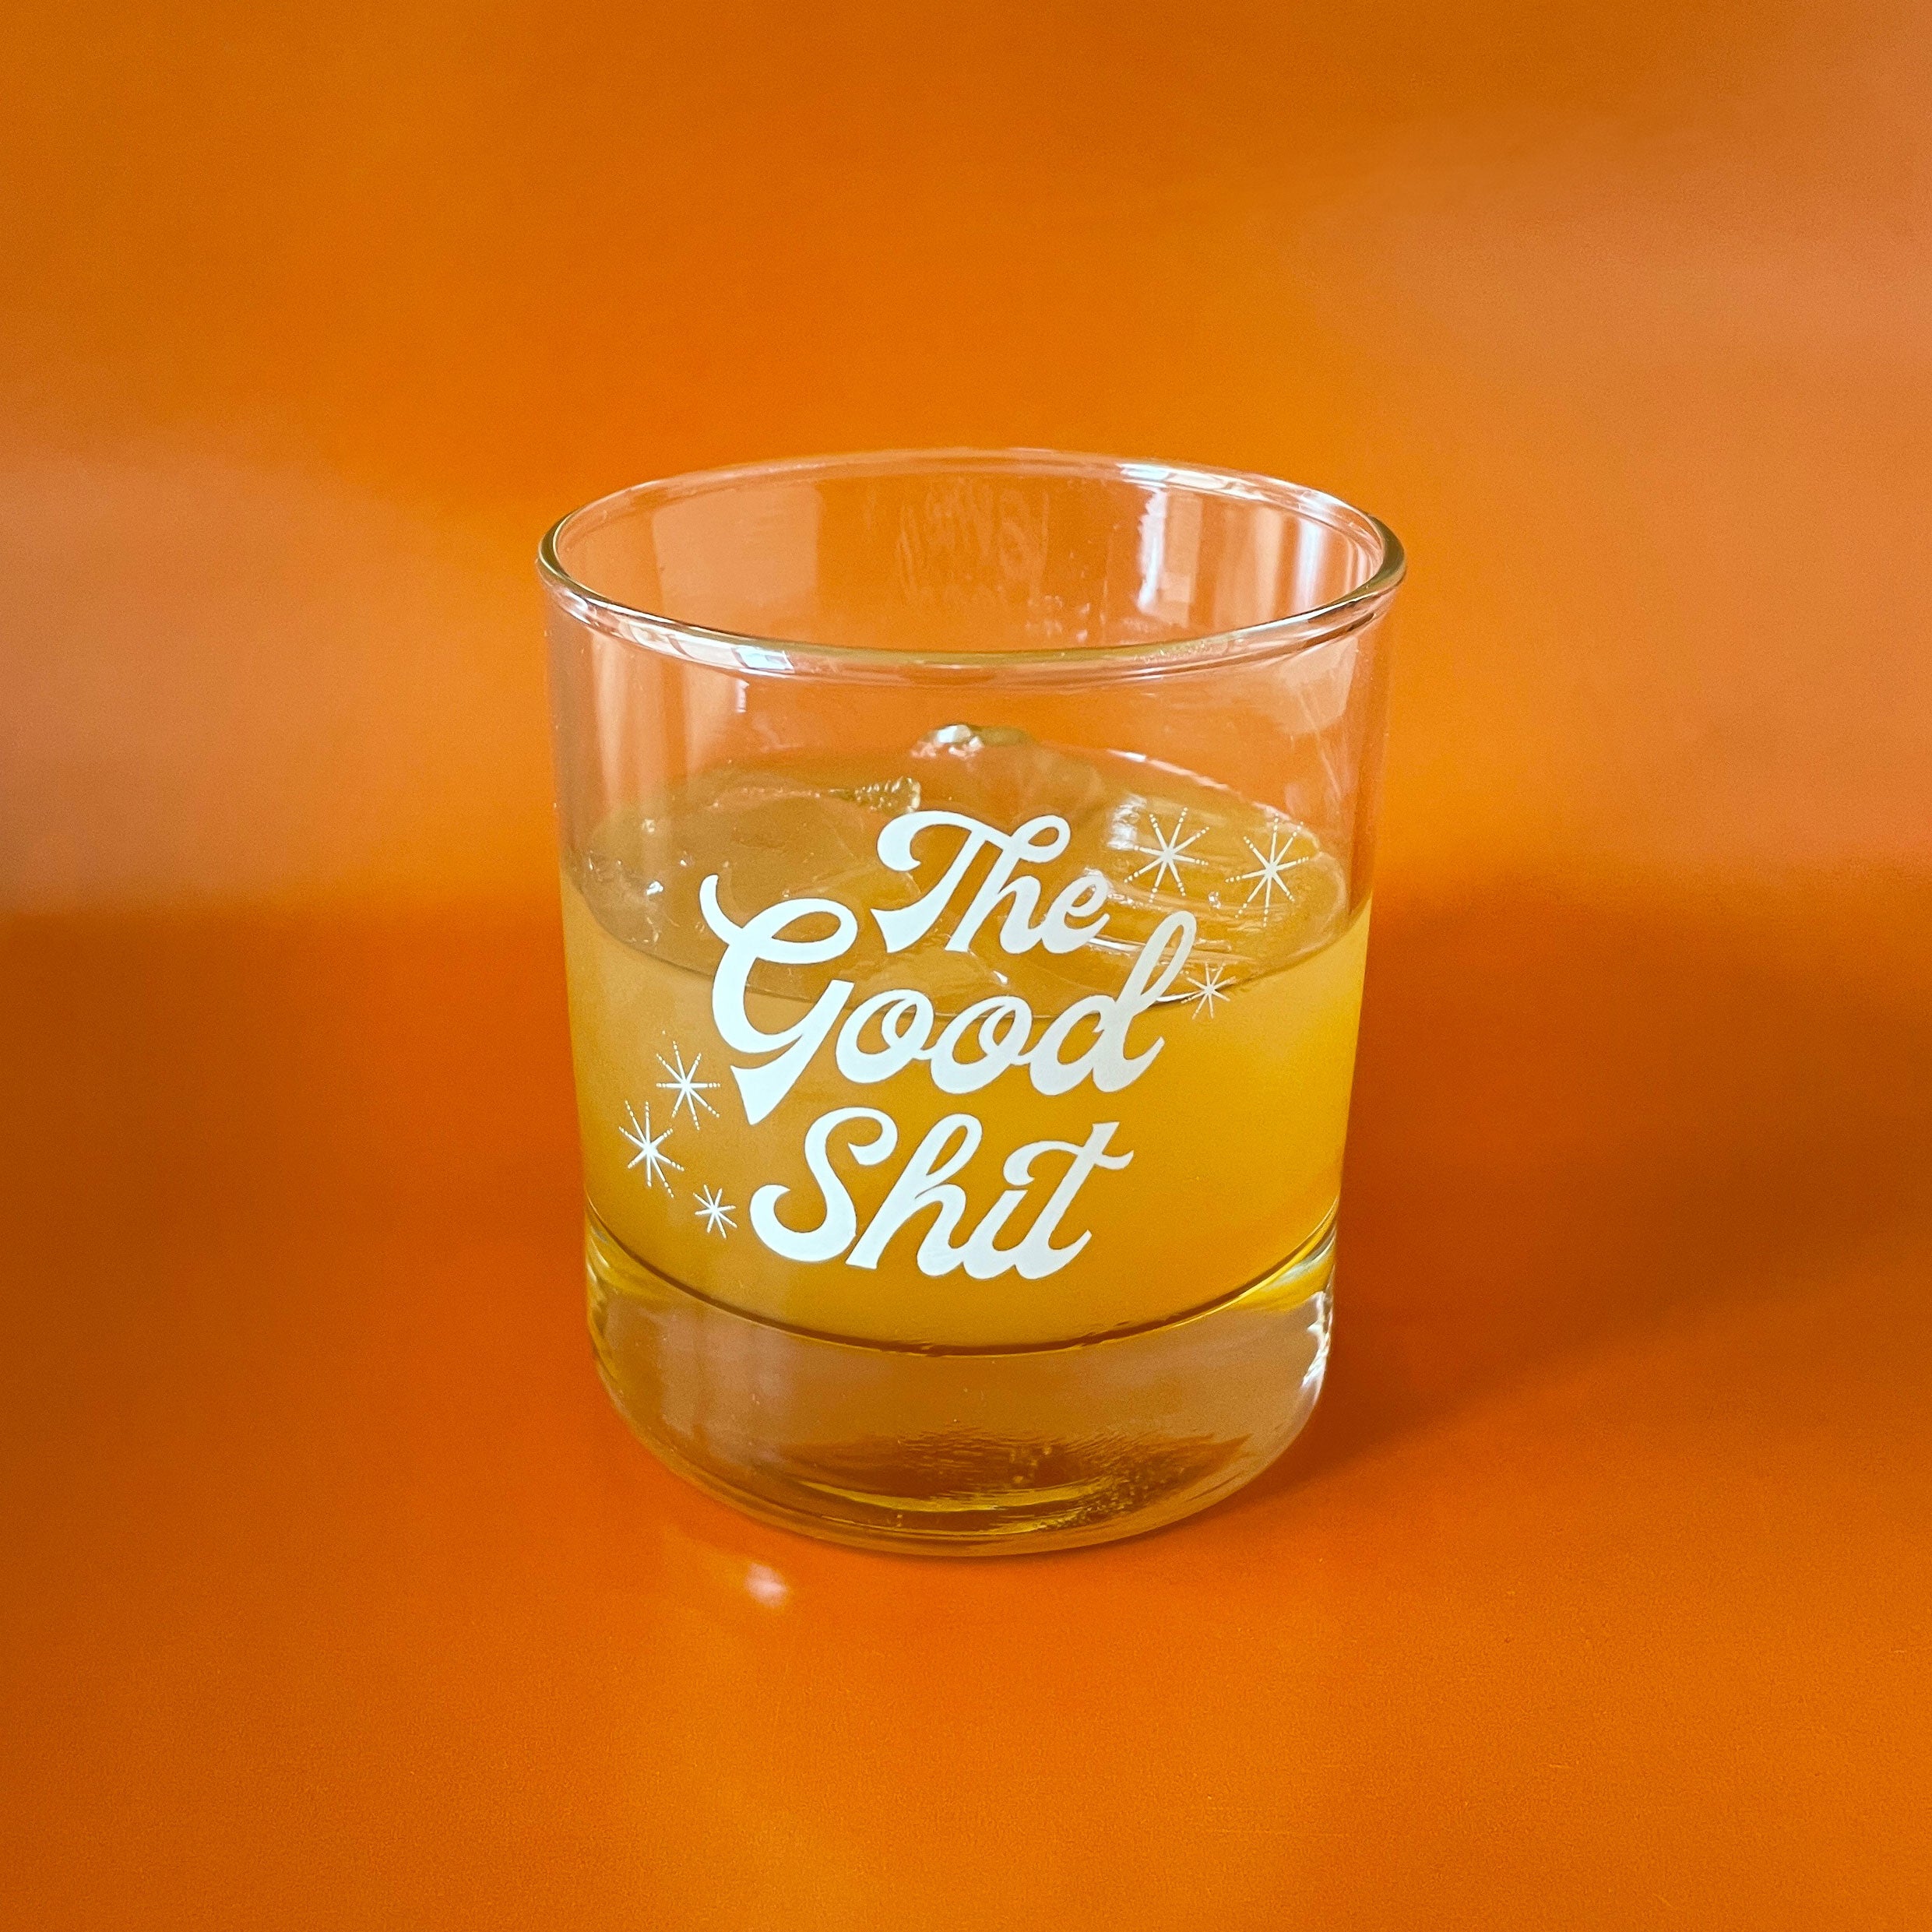 Against an orange background is a photograph of a short glass tumbler with a thick bottom and &quot;The Good Shit&quot; printed across the center in white groovy cursive text.